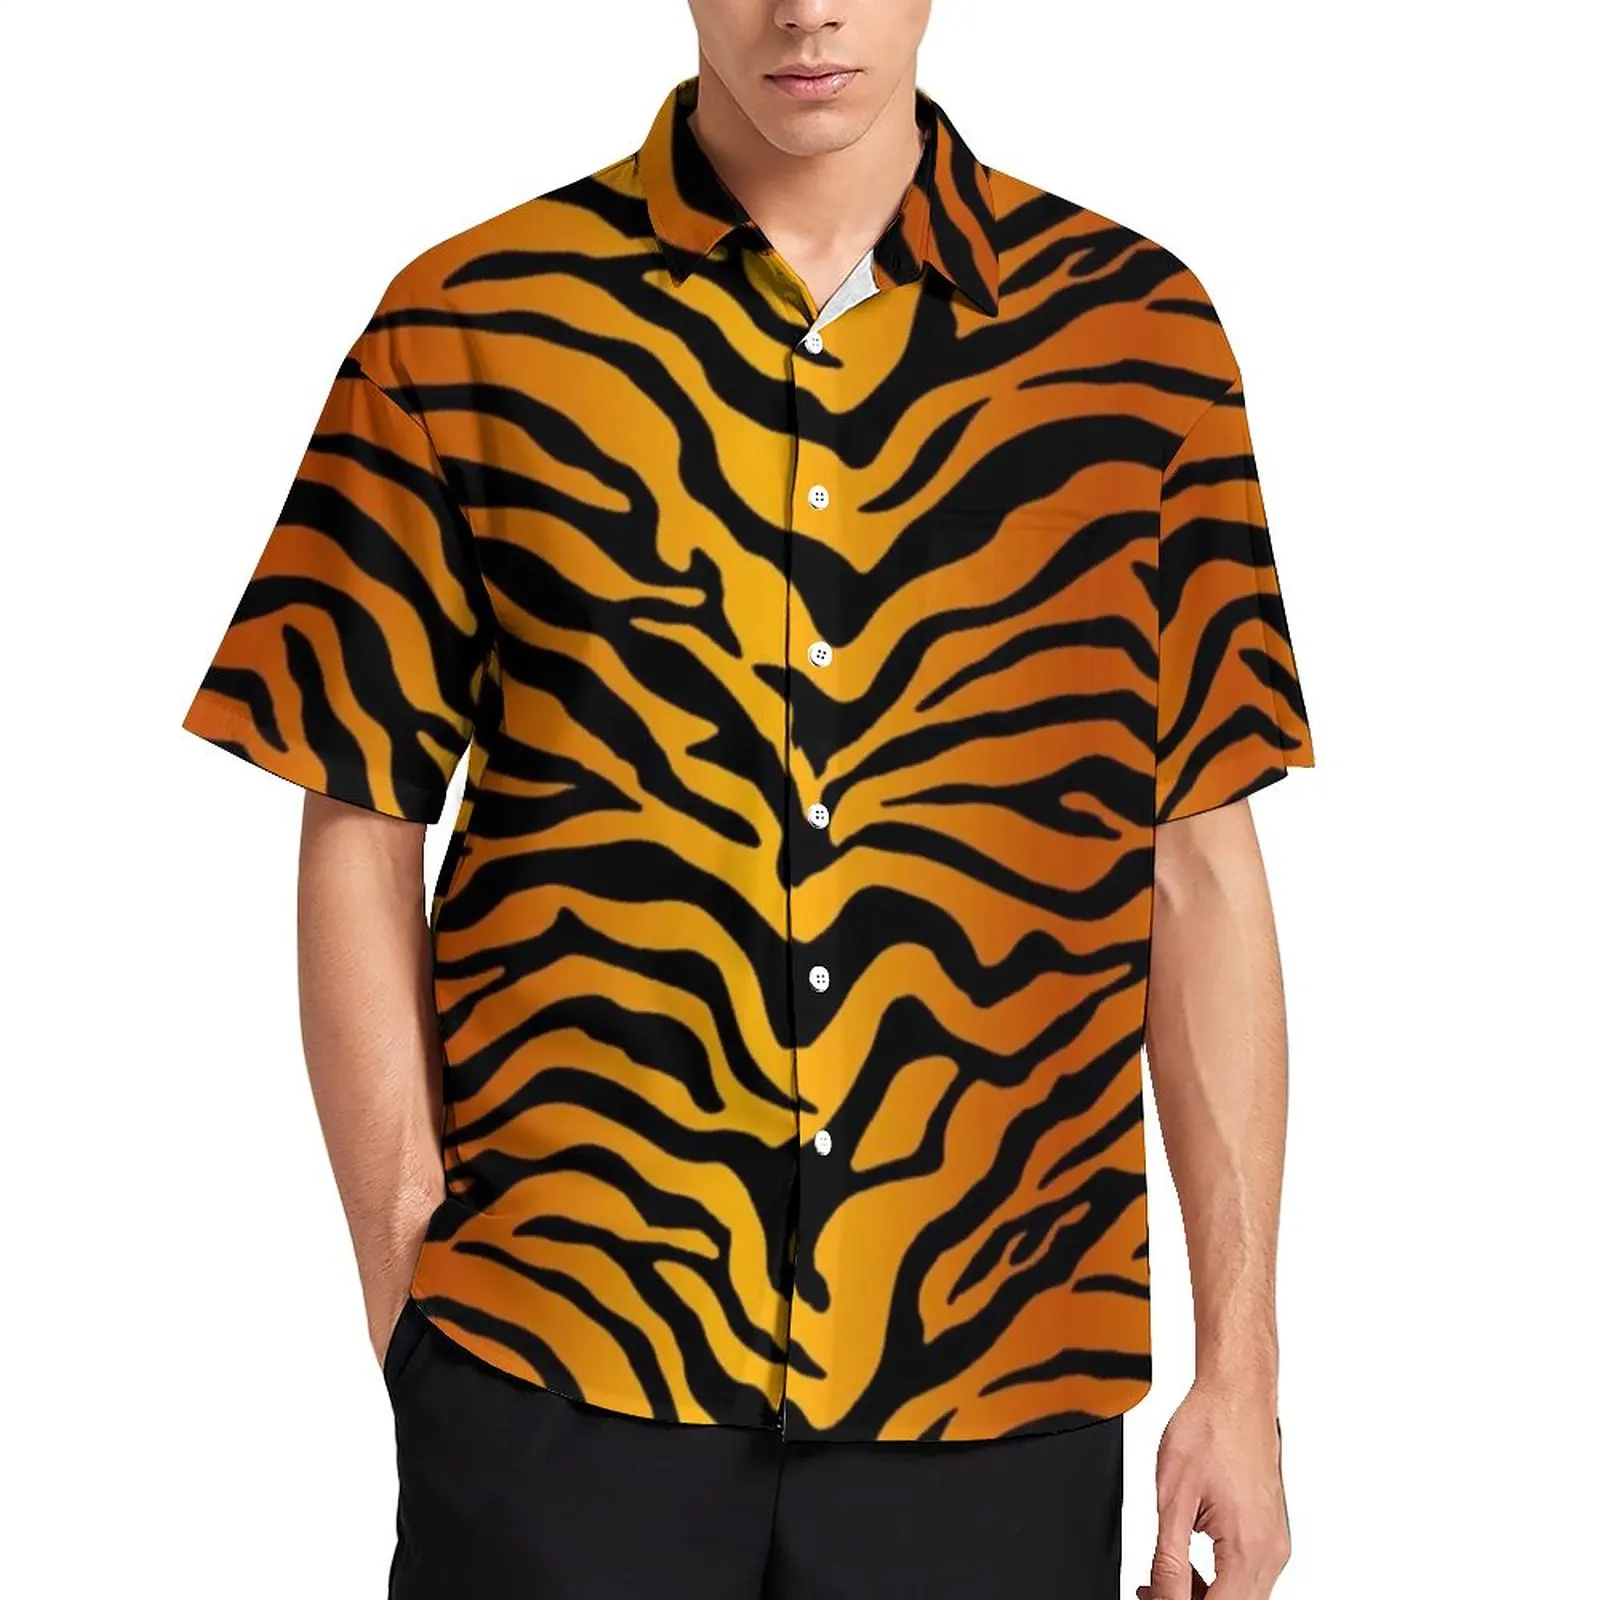 

Tiger Stripes Yellow Vacation Shirt Animal Print Hawaii Casual Shirts Men Trending Blouses Short Sleeve Graphic Tops Plus Size